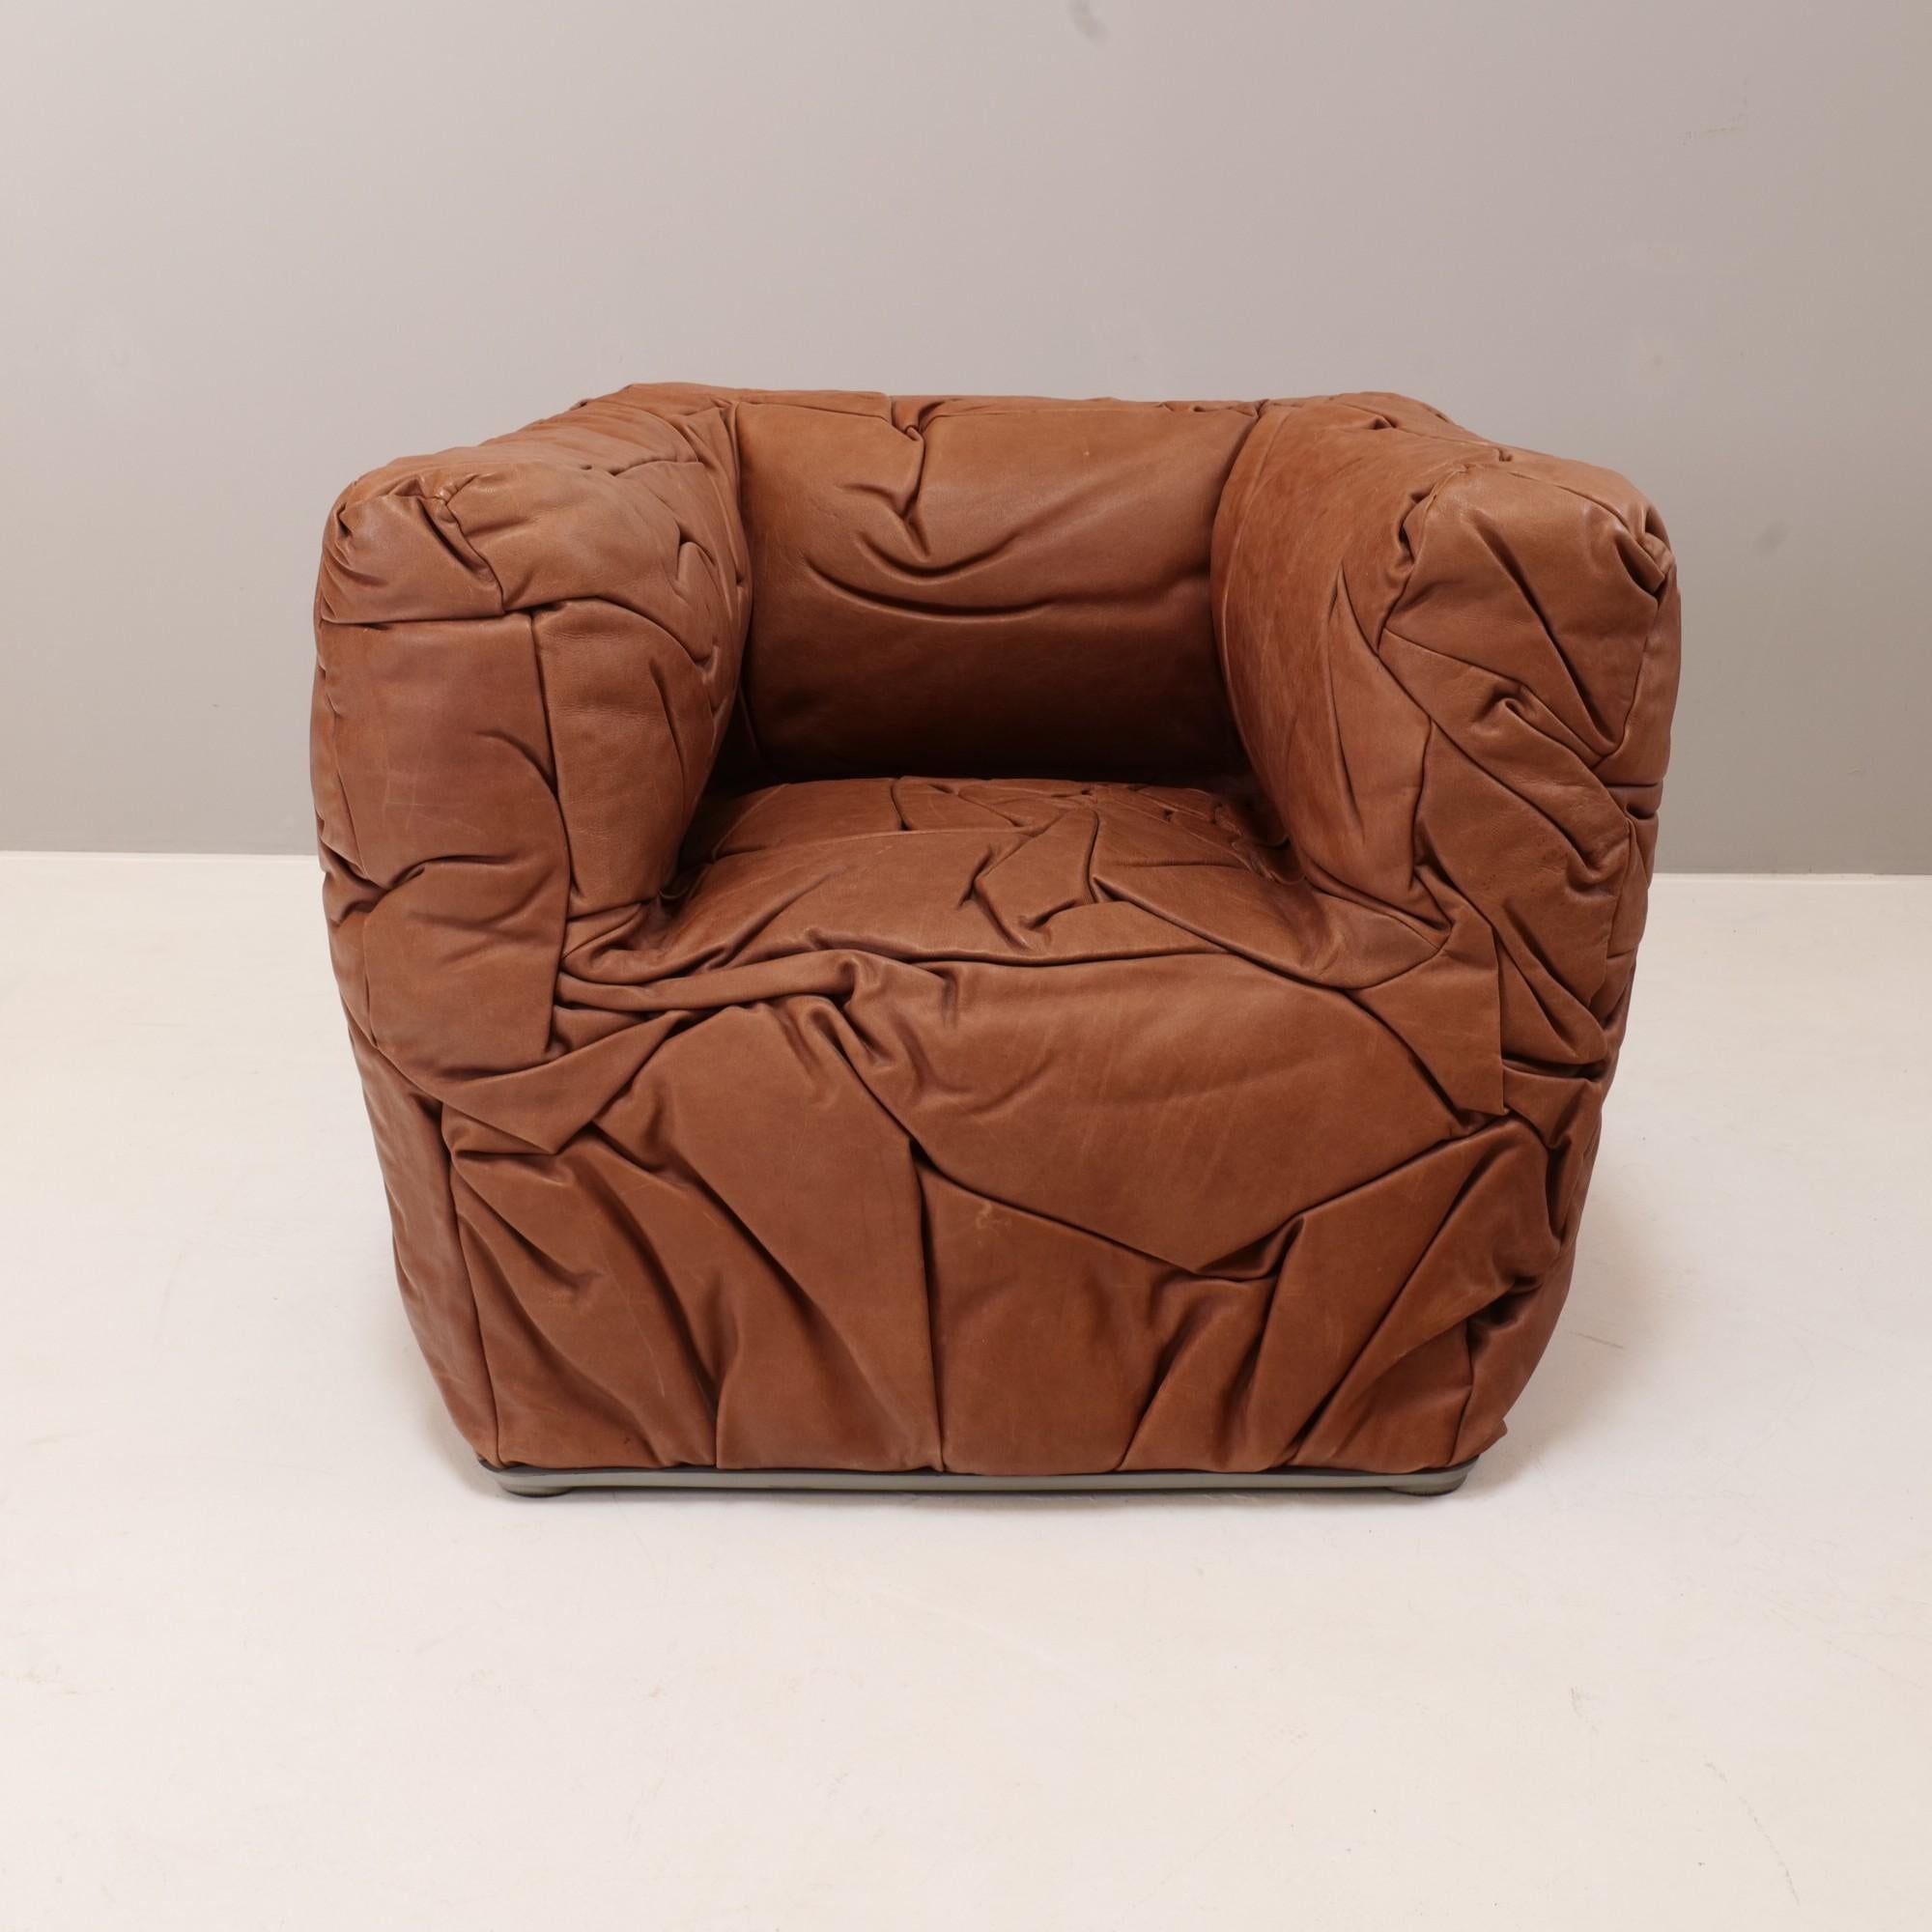 Italian leather club chair by Peter Traag for Edra - Italy

Maximum comfort, universal and timeless elegance are the basic characteristics of Edra.
Edra was founded in 1987 in Tuscany. Today Edra is known worldwide for the absolute quality of its